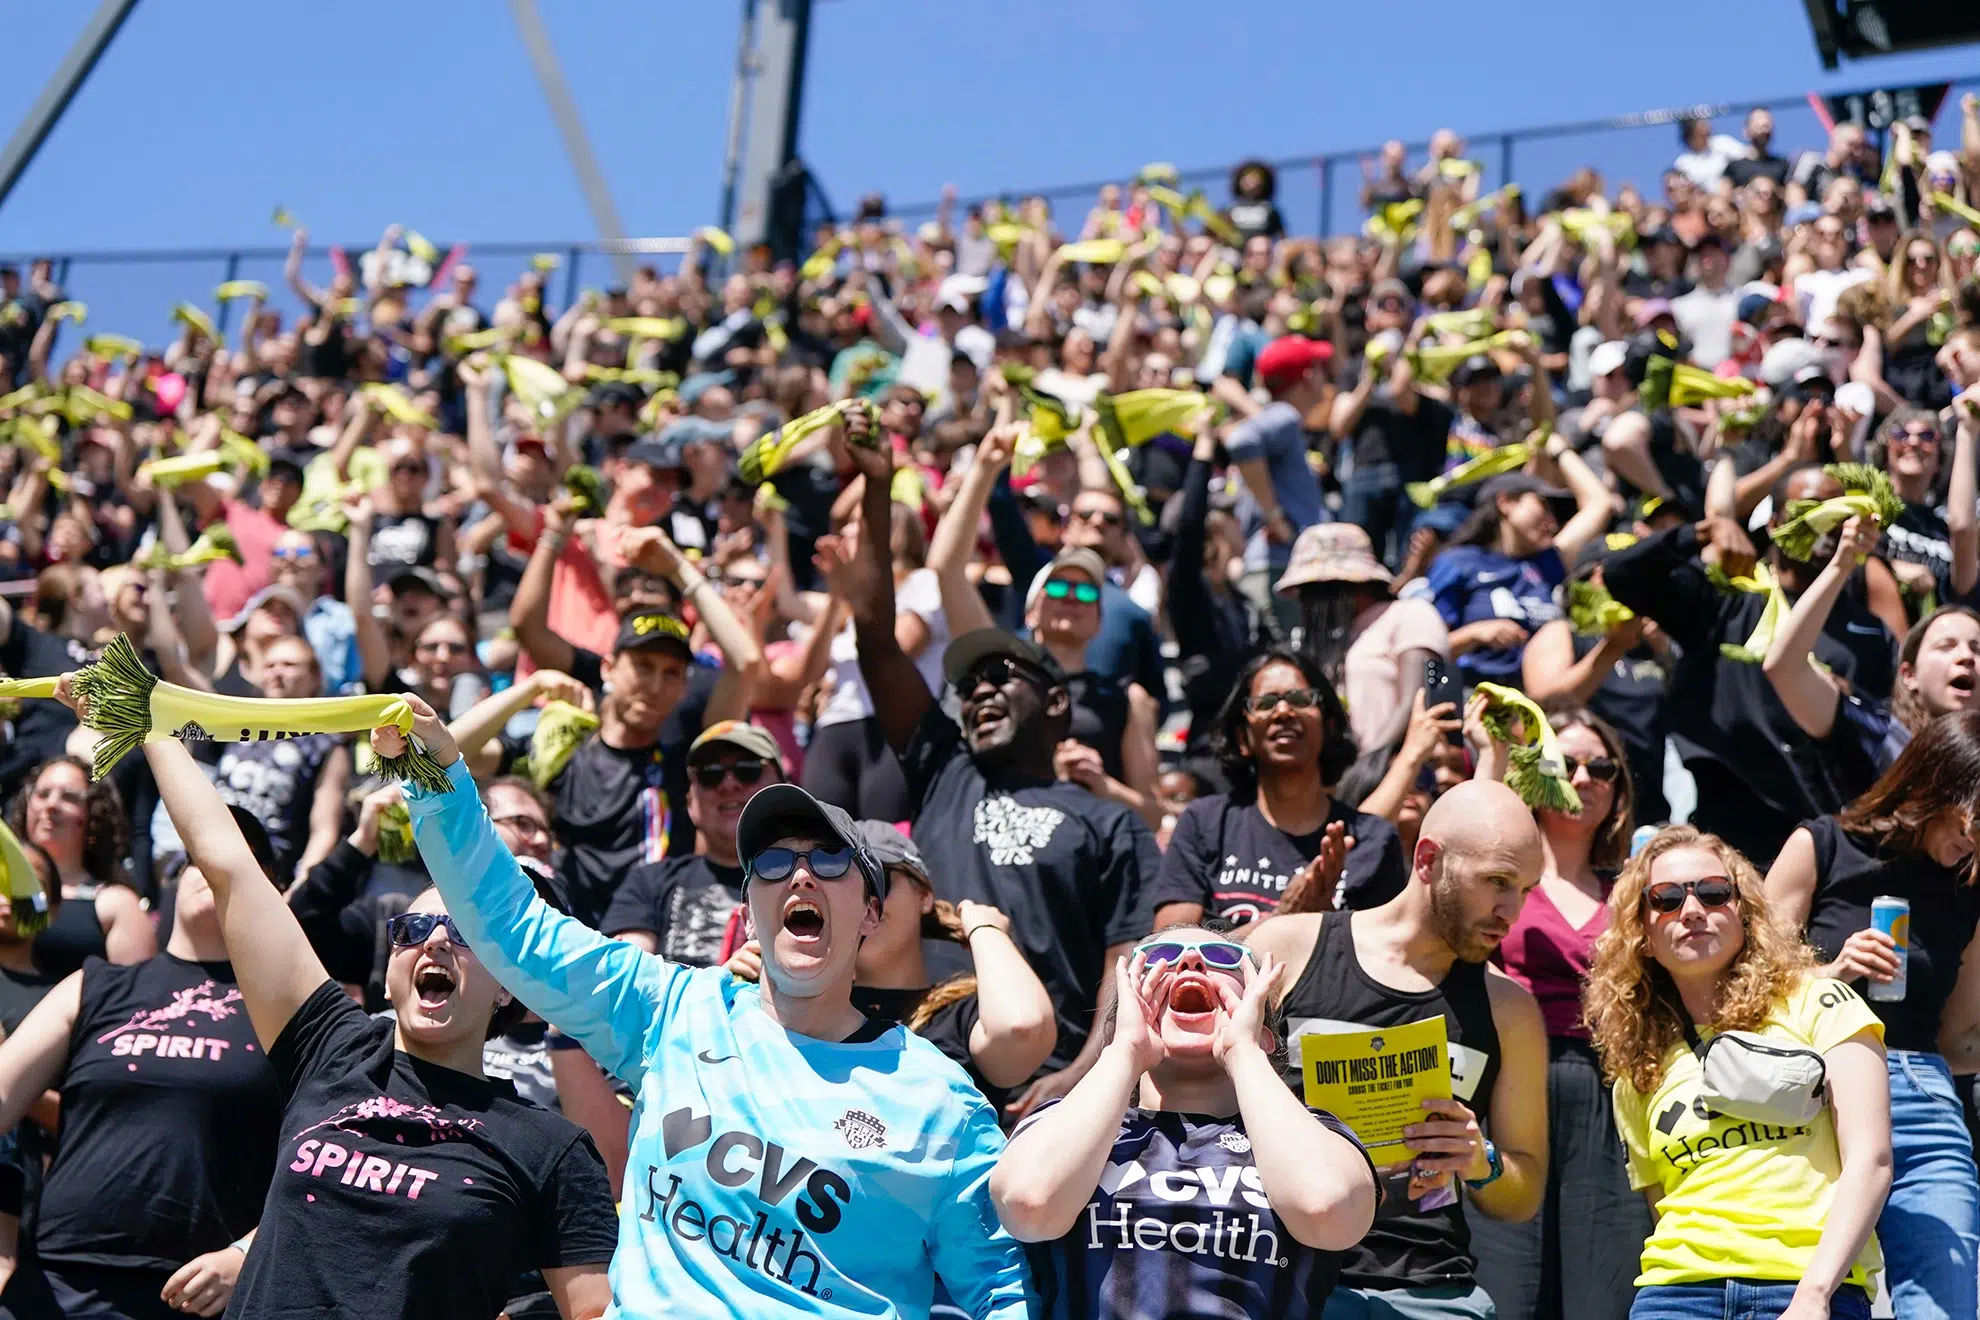 A crowd of fans in various Spirit t-shirts and jerseys wave yellow mini scarves in the air.